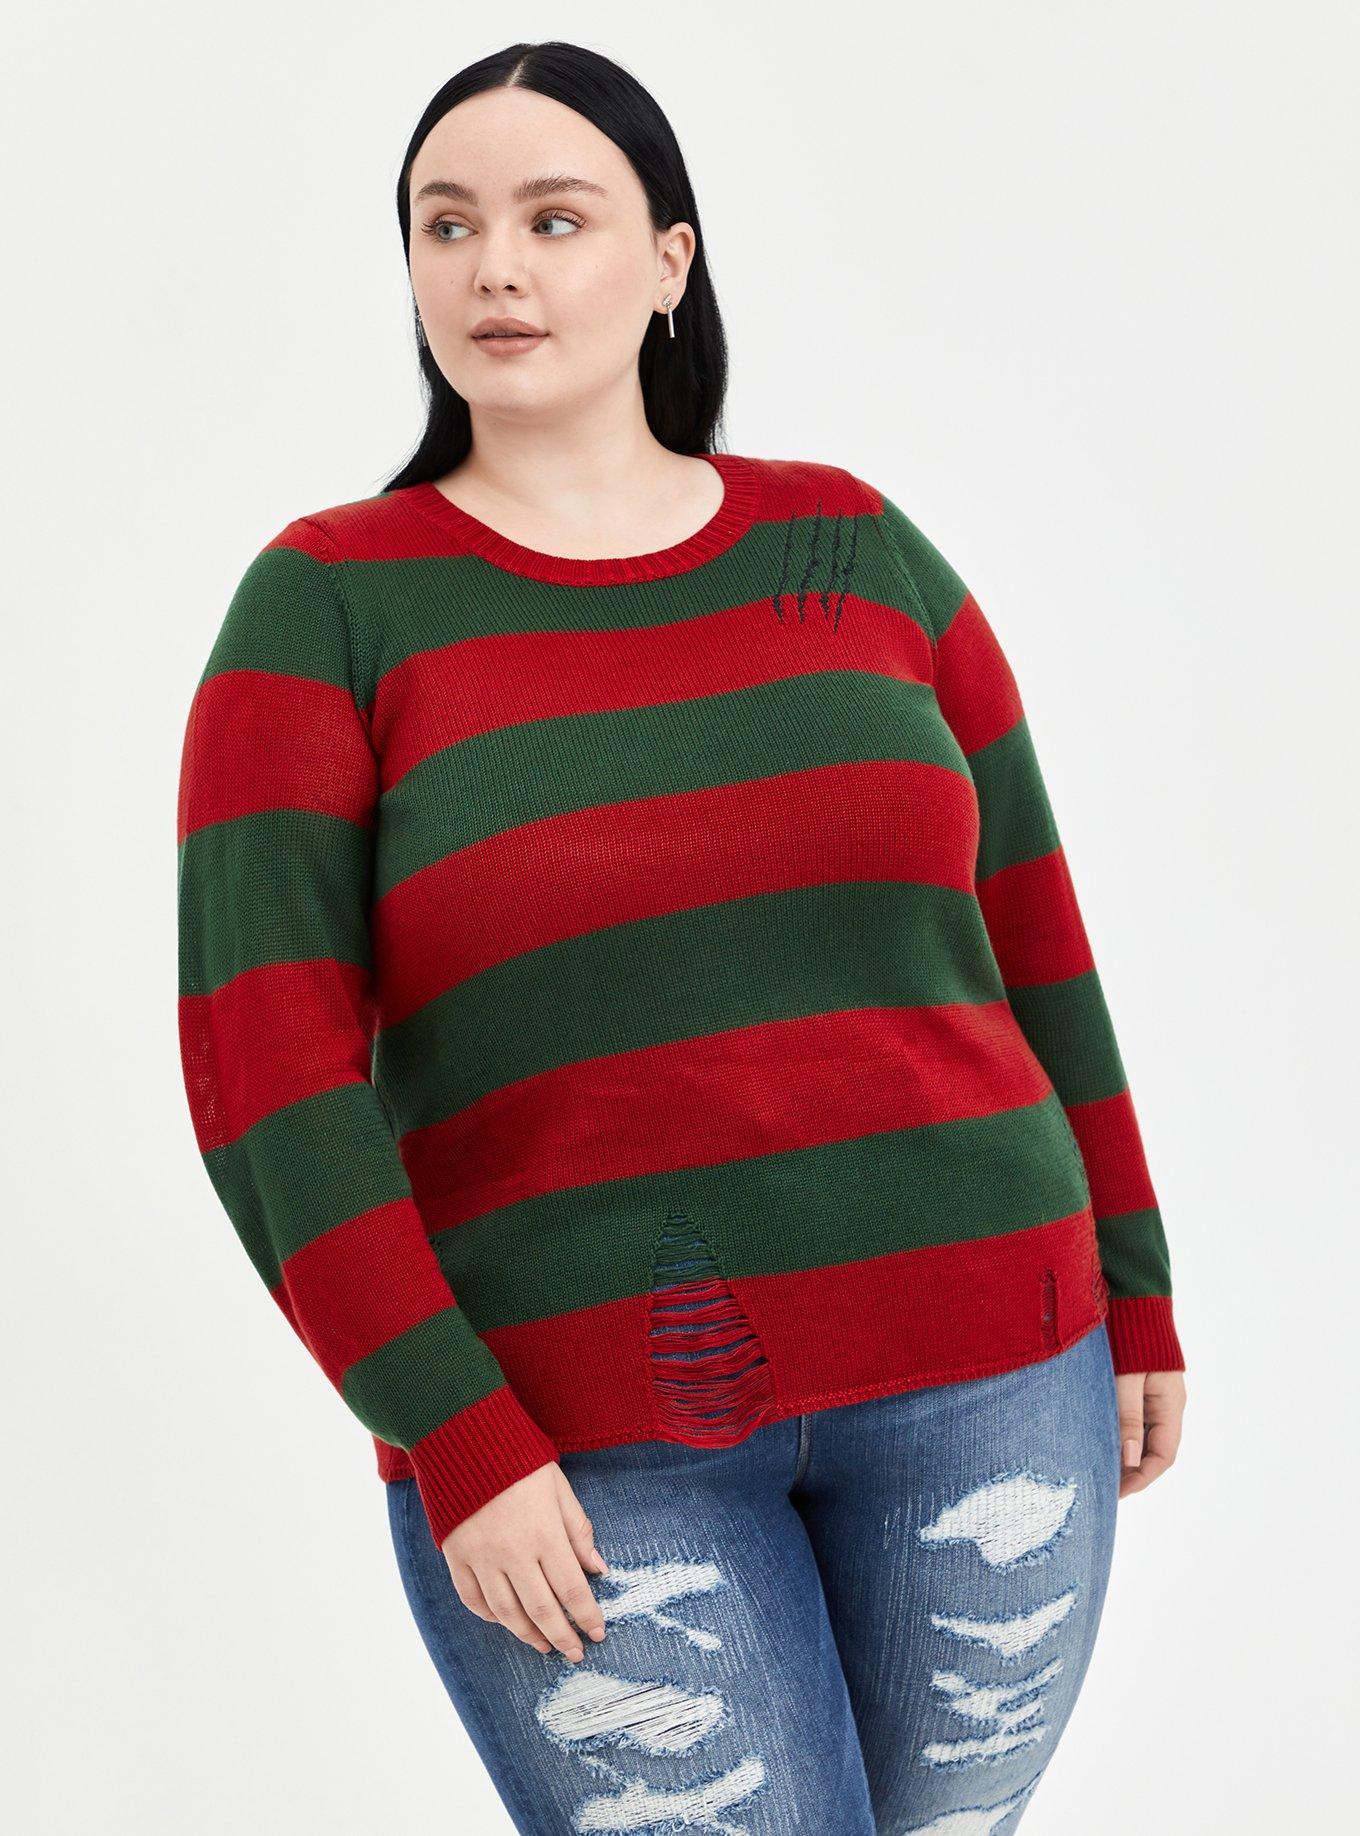 Crew-neck striped sweater Women fall winter casual large-size sweater band